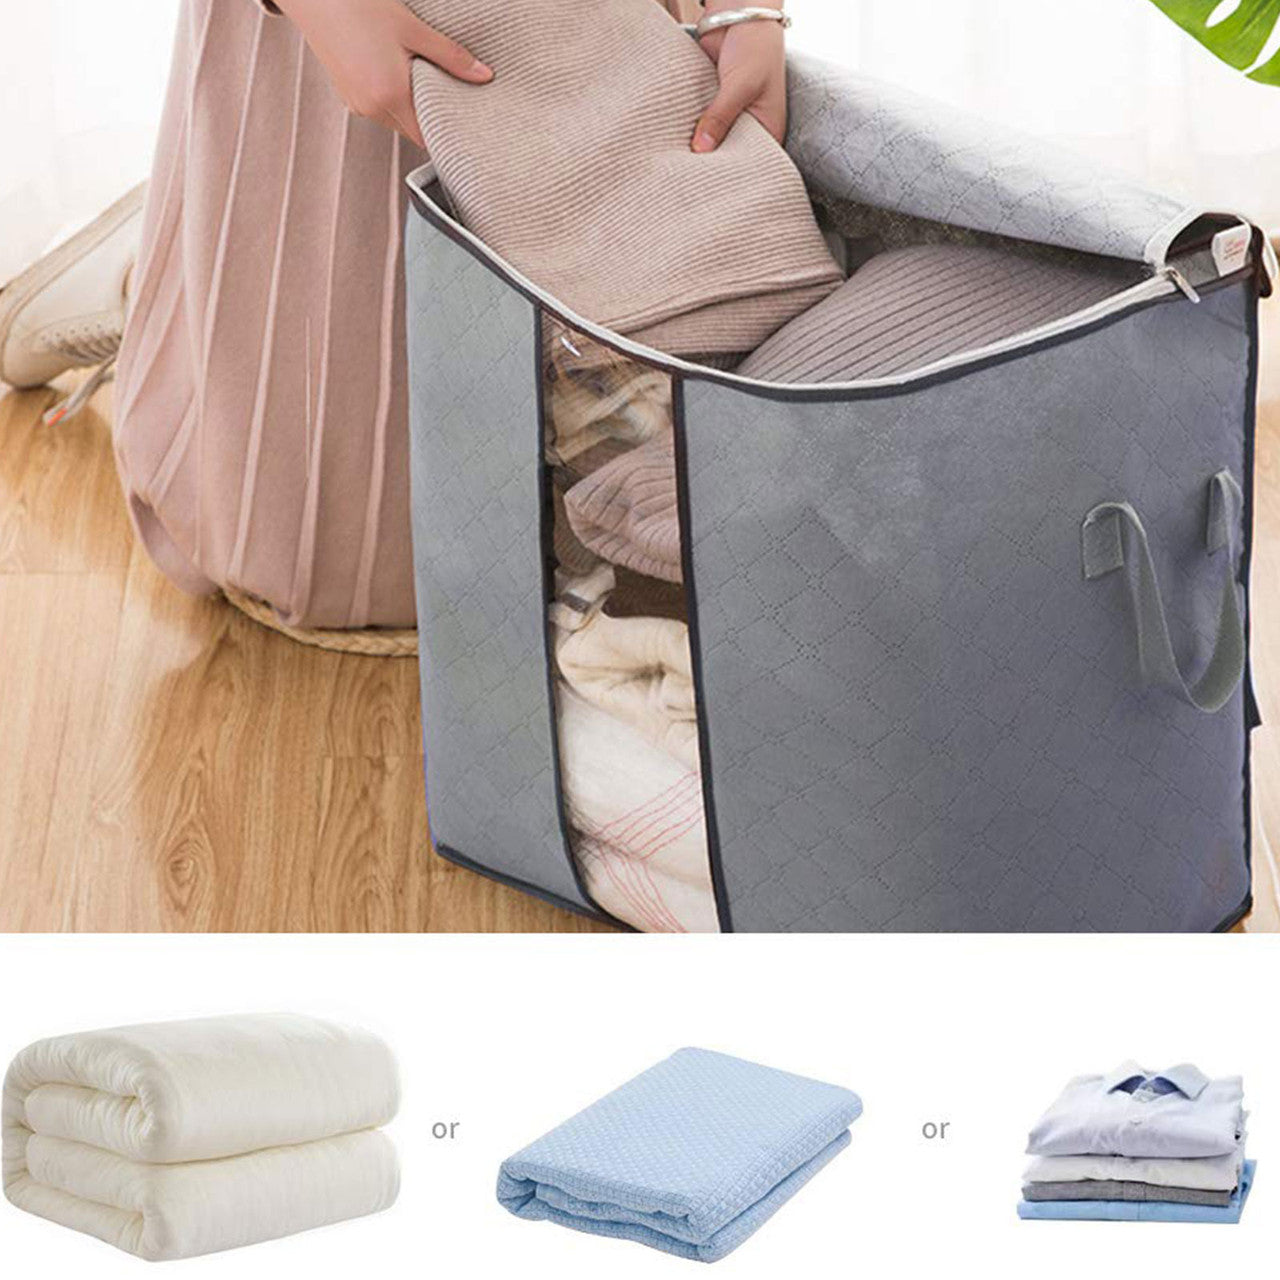 Foldable Storage Bag Organizers,Waterproof Anti-Mold Moisture Proof Clothes Storage Container Zipper Bag with Clear Window Carry Handles for Blanket Comforter Bedding